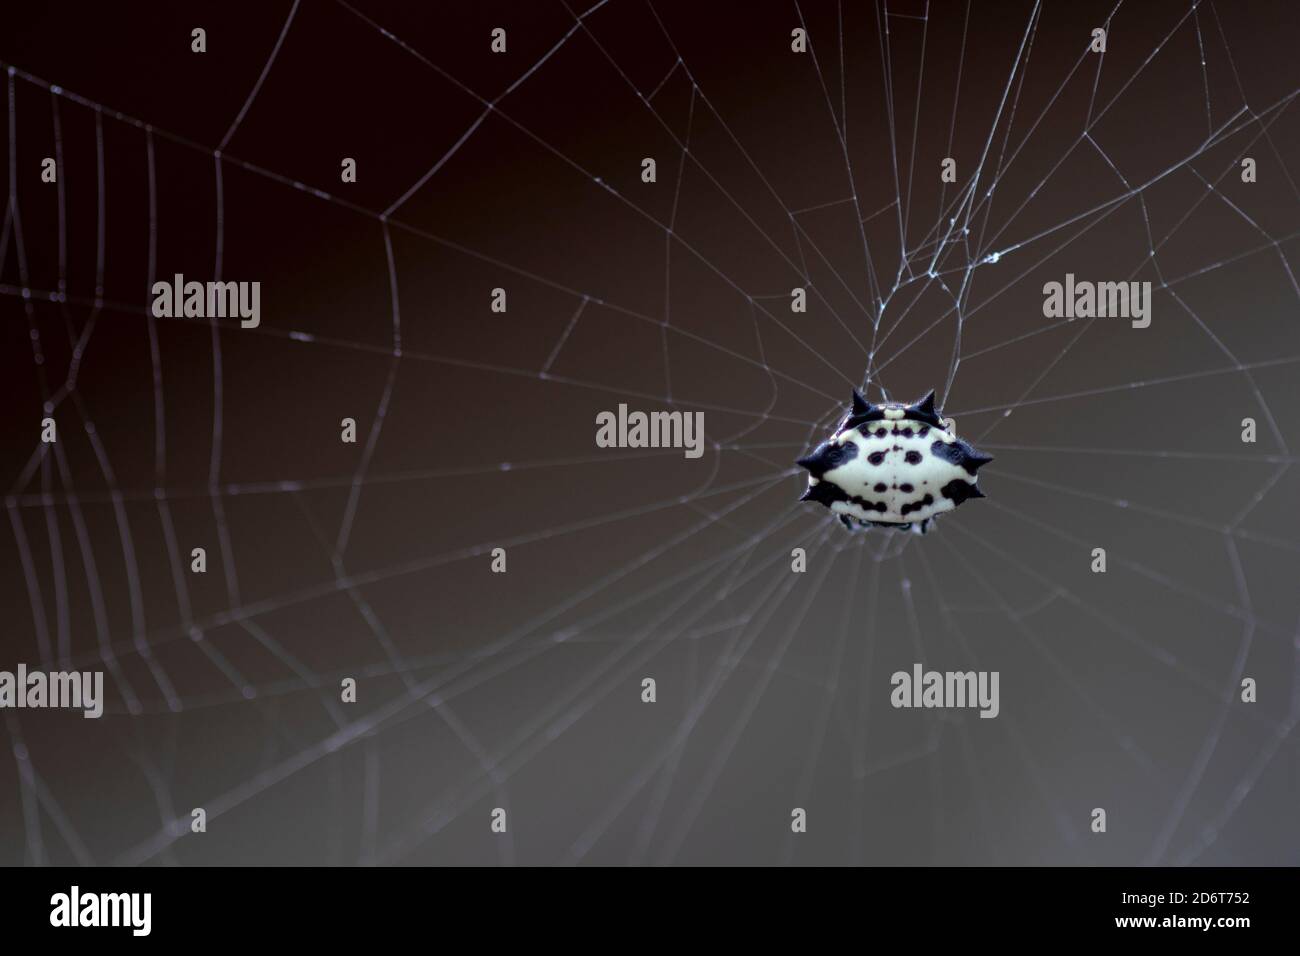 Spiny Orbweaver spider suspended in web Stock Photo